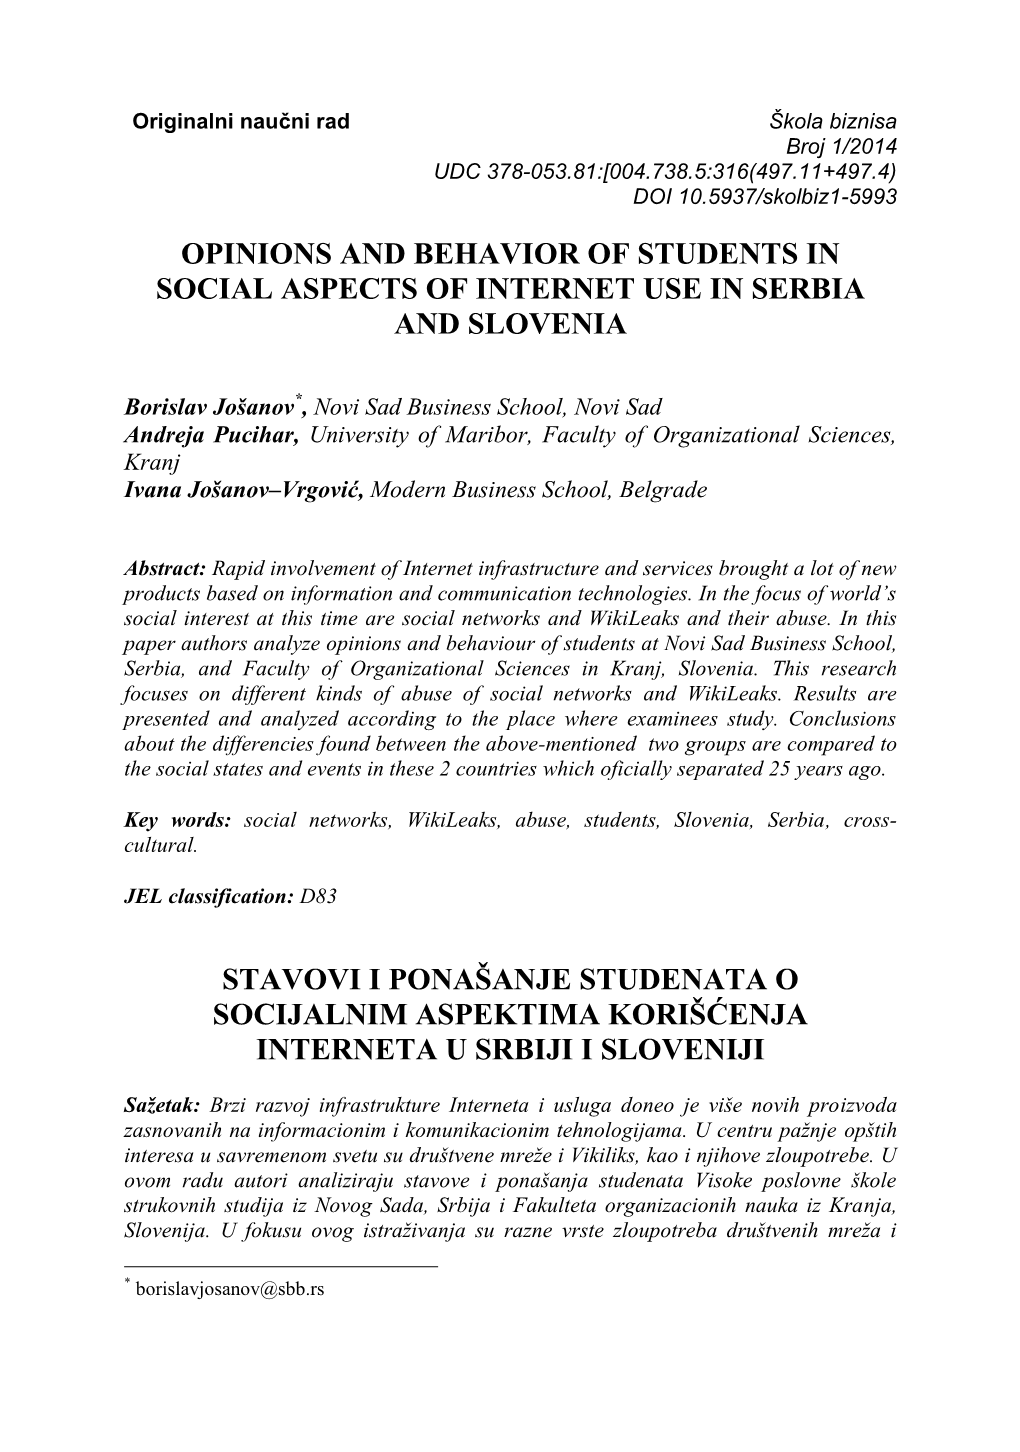 Opinions and Behavior of Students in Social Aspects of Internet Use in Serbia and Slovenia